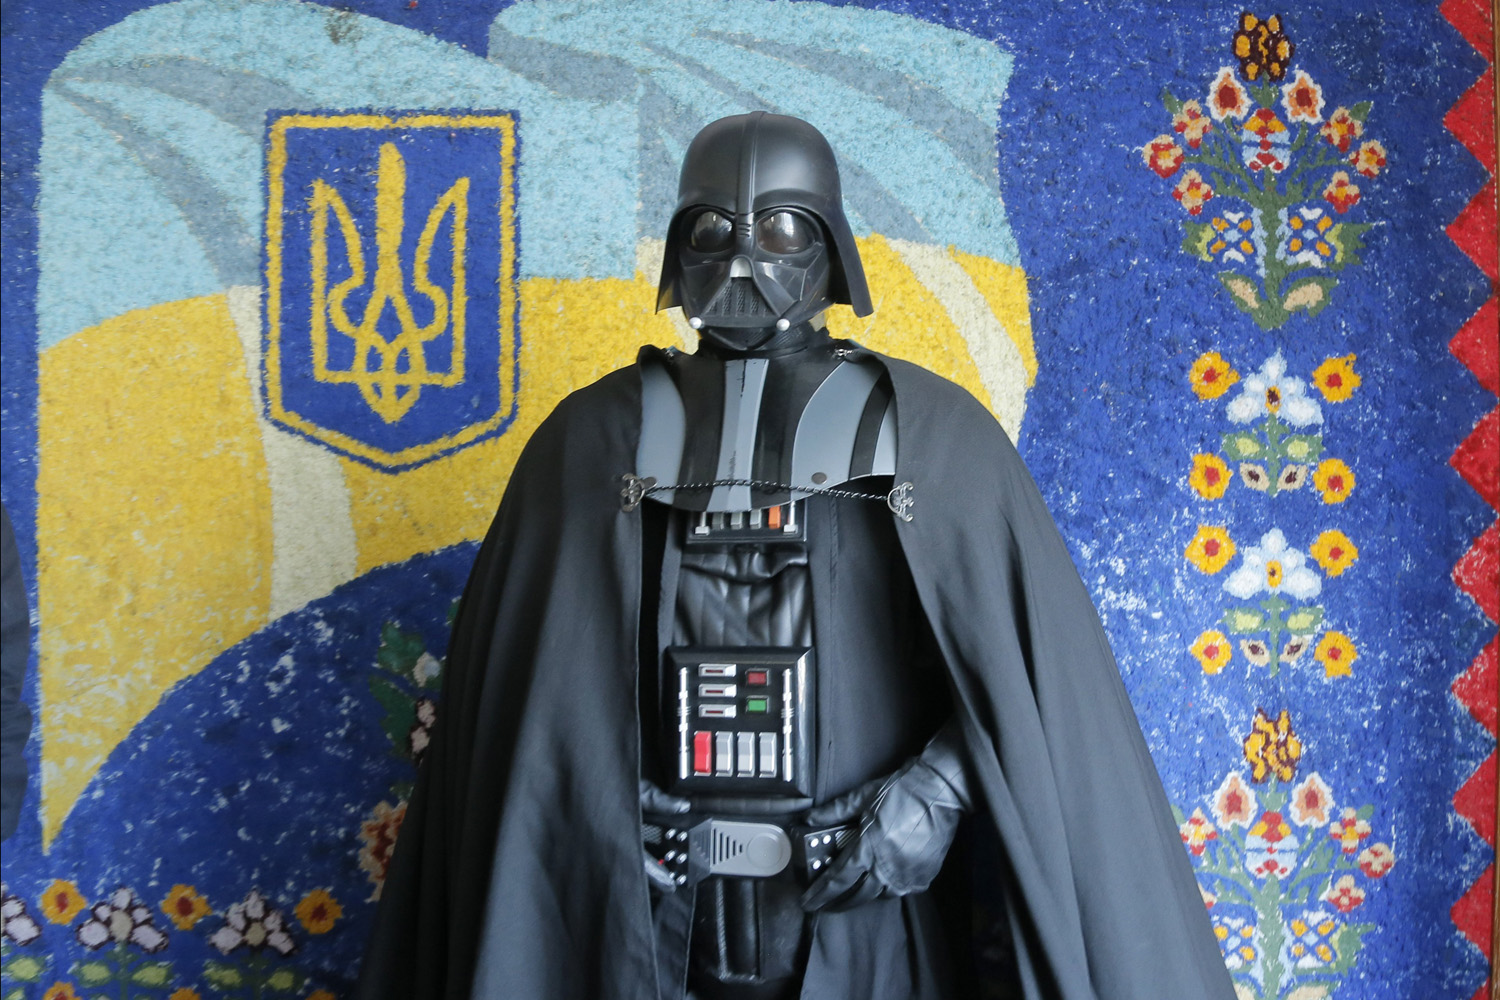 Darth Vader, the Ukrainian Internet Party mayoral candidate for Kiev and Odessa, speaks to the press in front of a painting of the Ukrainian flag at a polling station during the presidential and mayoral elections in Kiev, Ukraine on May, 25, 2014.